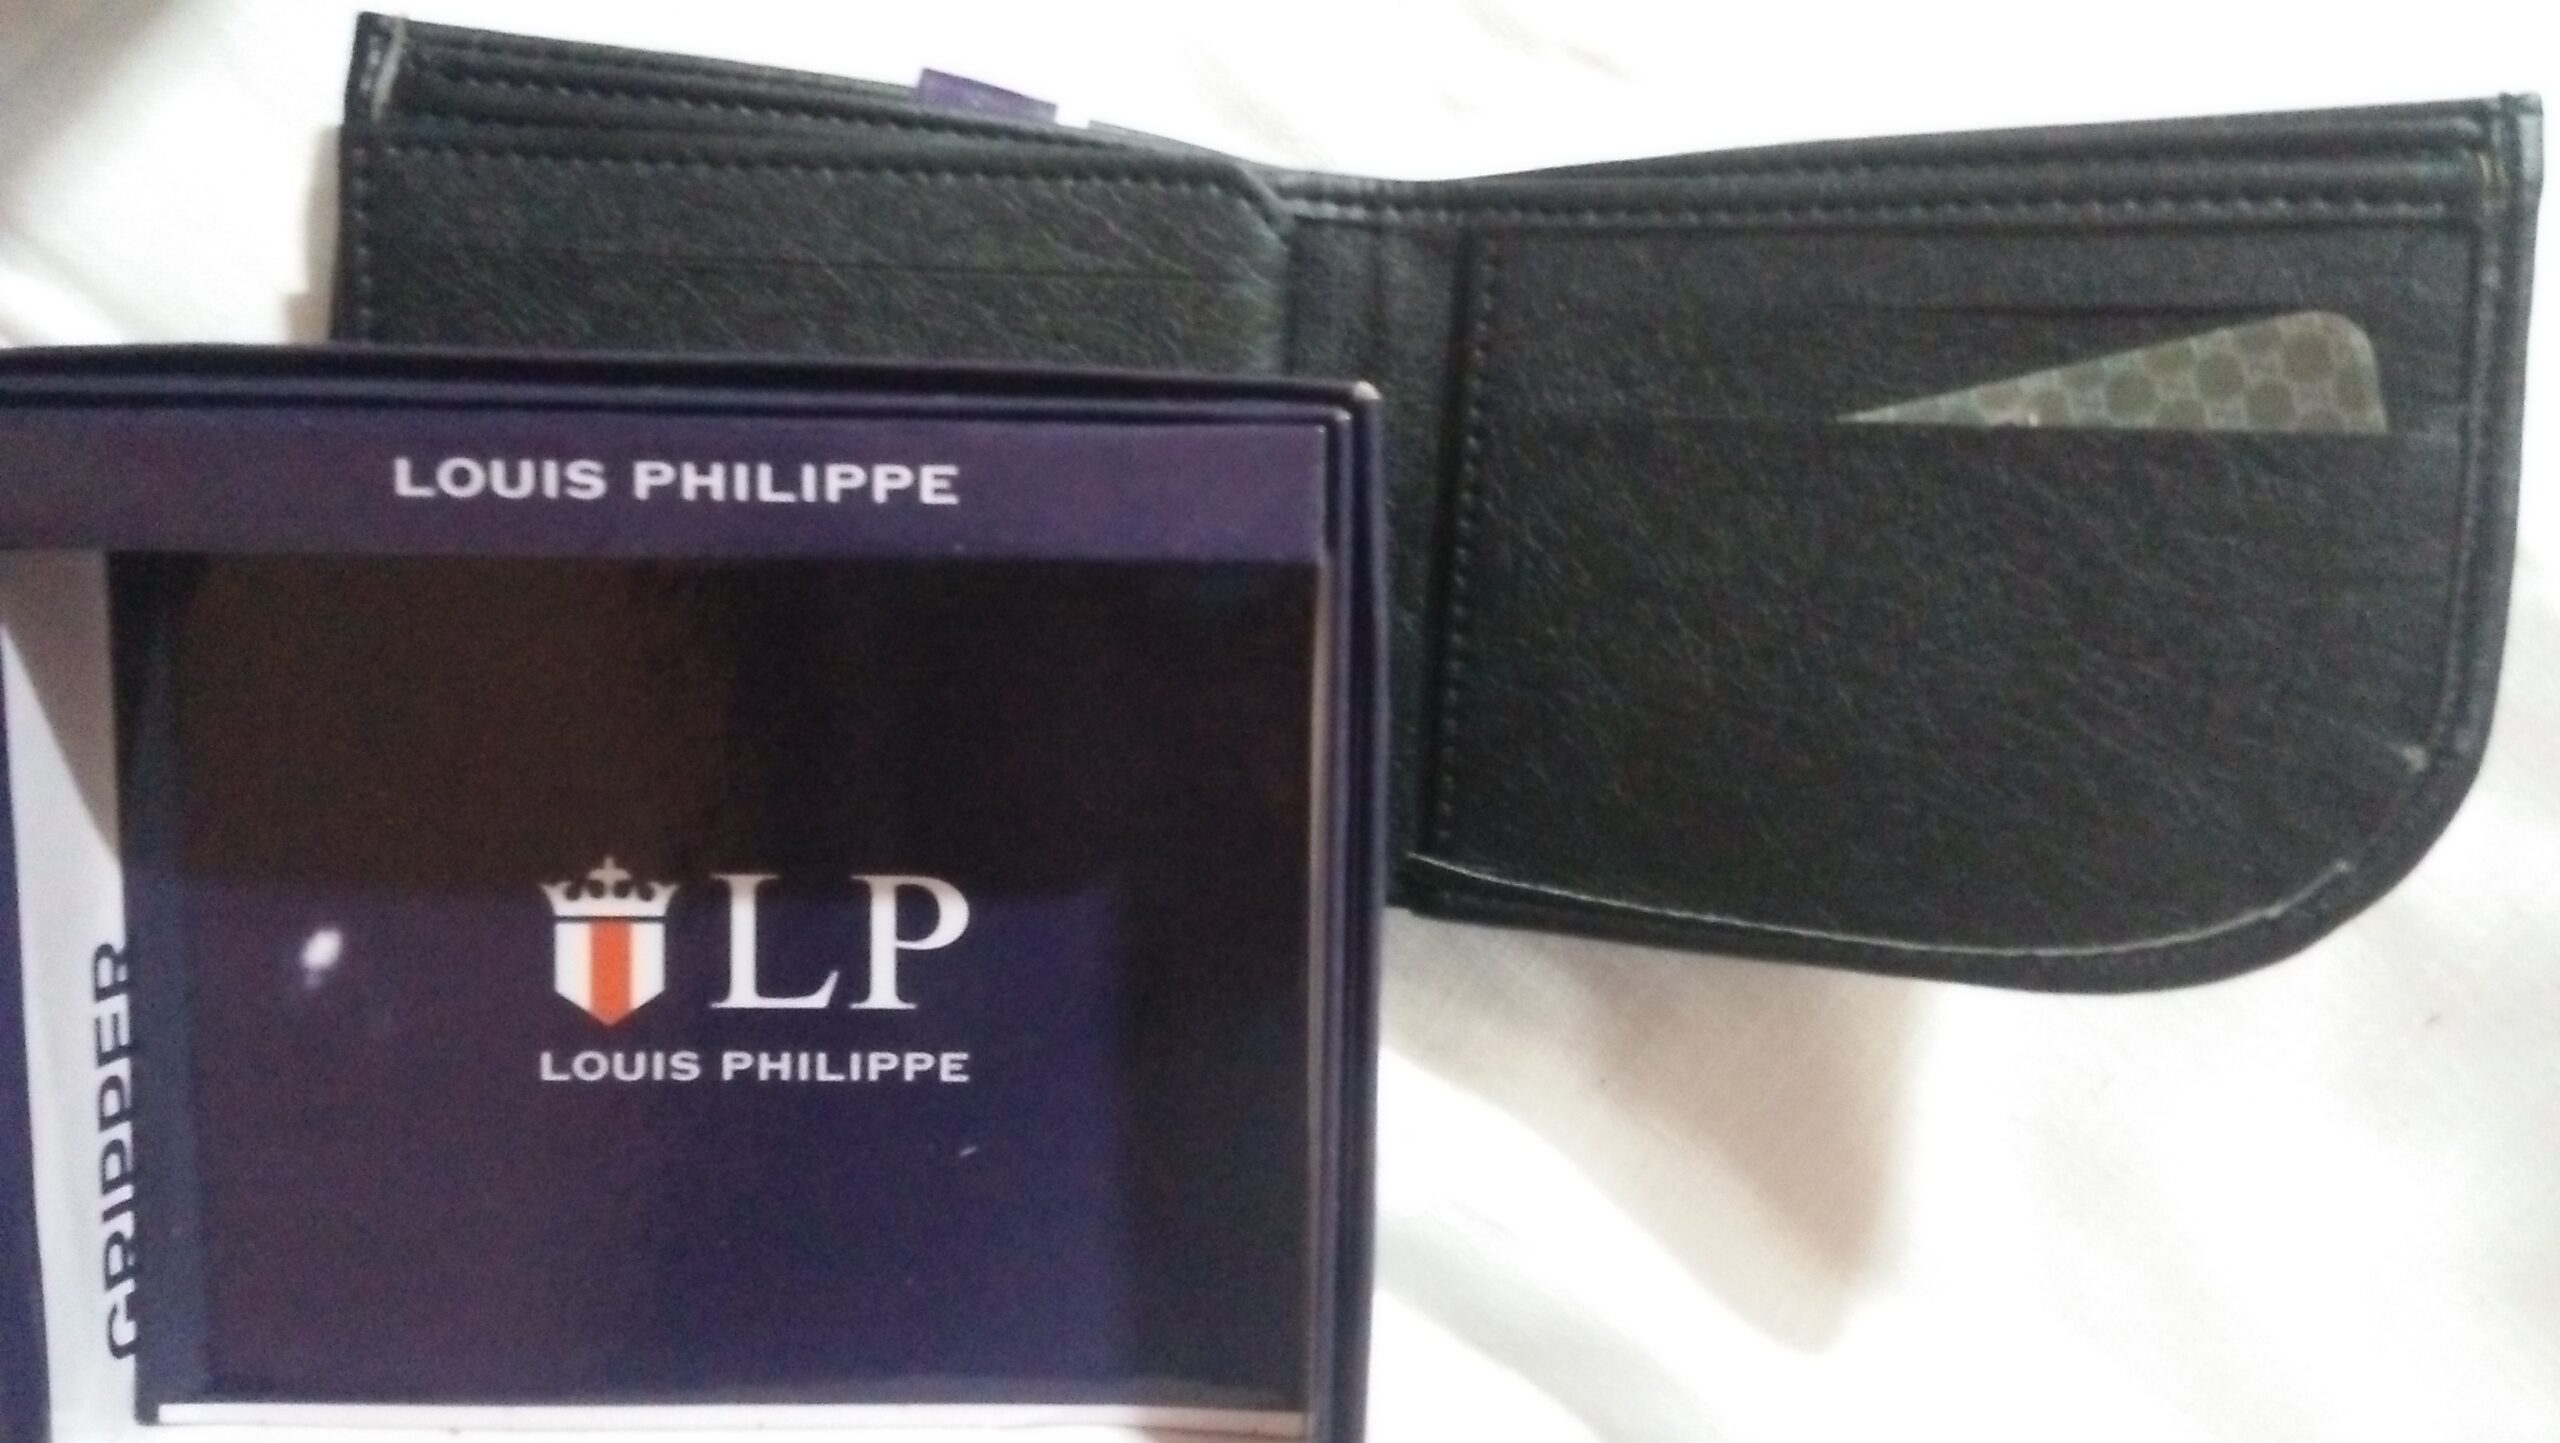 Buy Louis Philippe Wallet for Men Bi-Fold Genuine Leather Slim & Sleek with  RFID Security (Coin Pocket) at Amazon.in